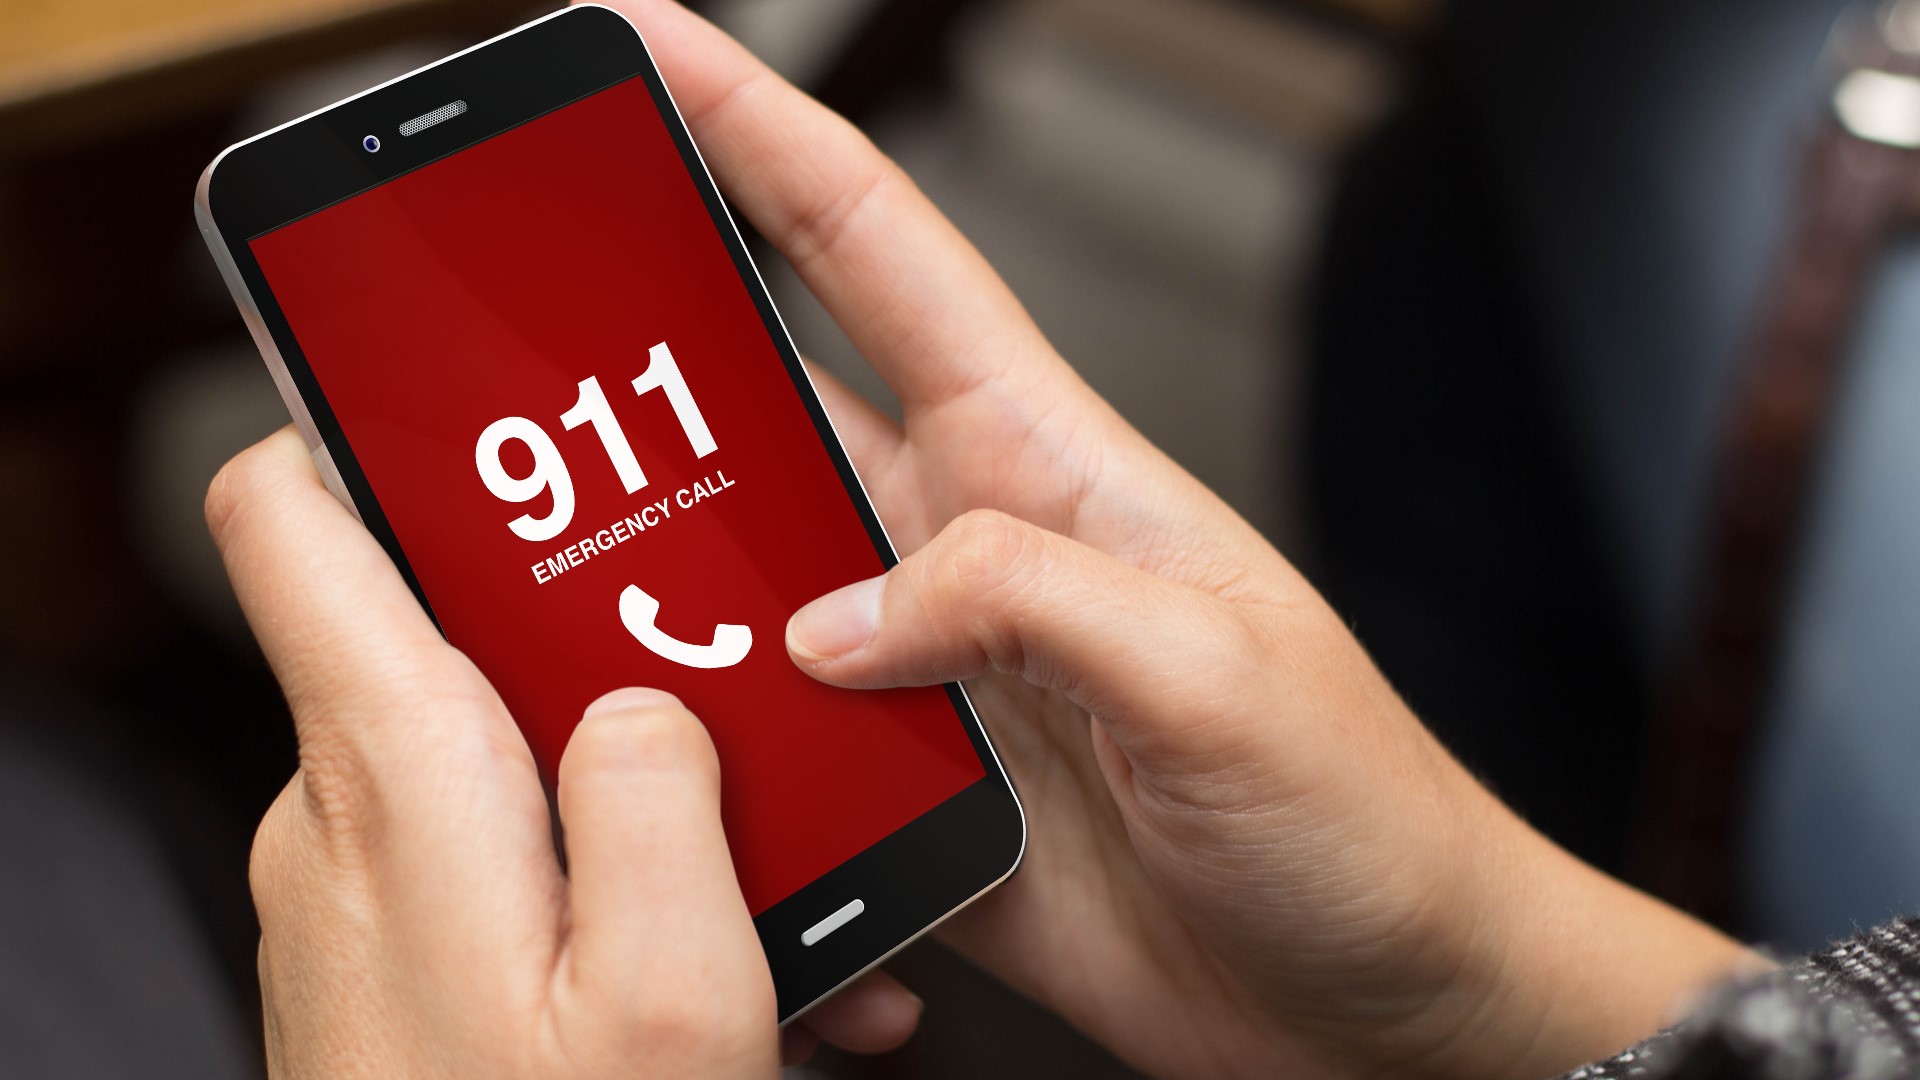 Fairfield County's 911 system and Sumter's E-911 service have been restored after outages that lasted several hours on Tuesday evening.